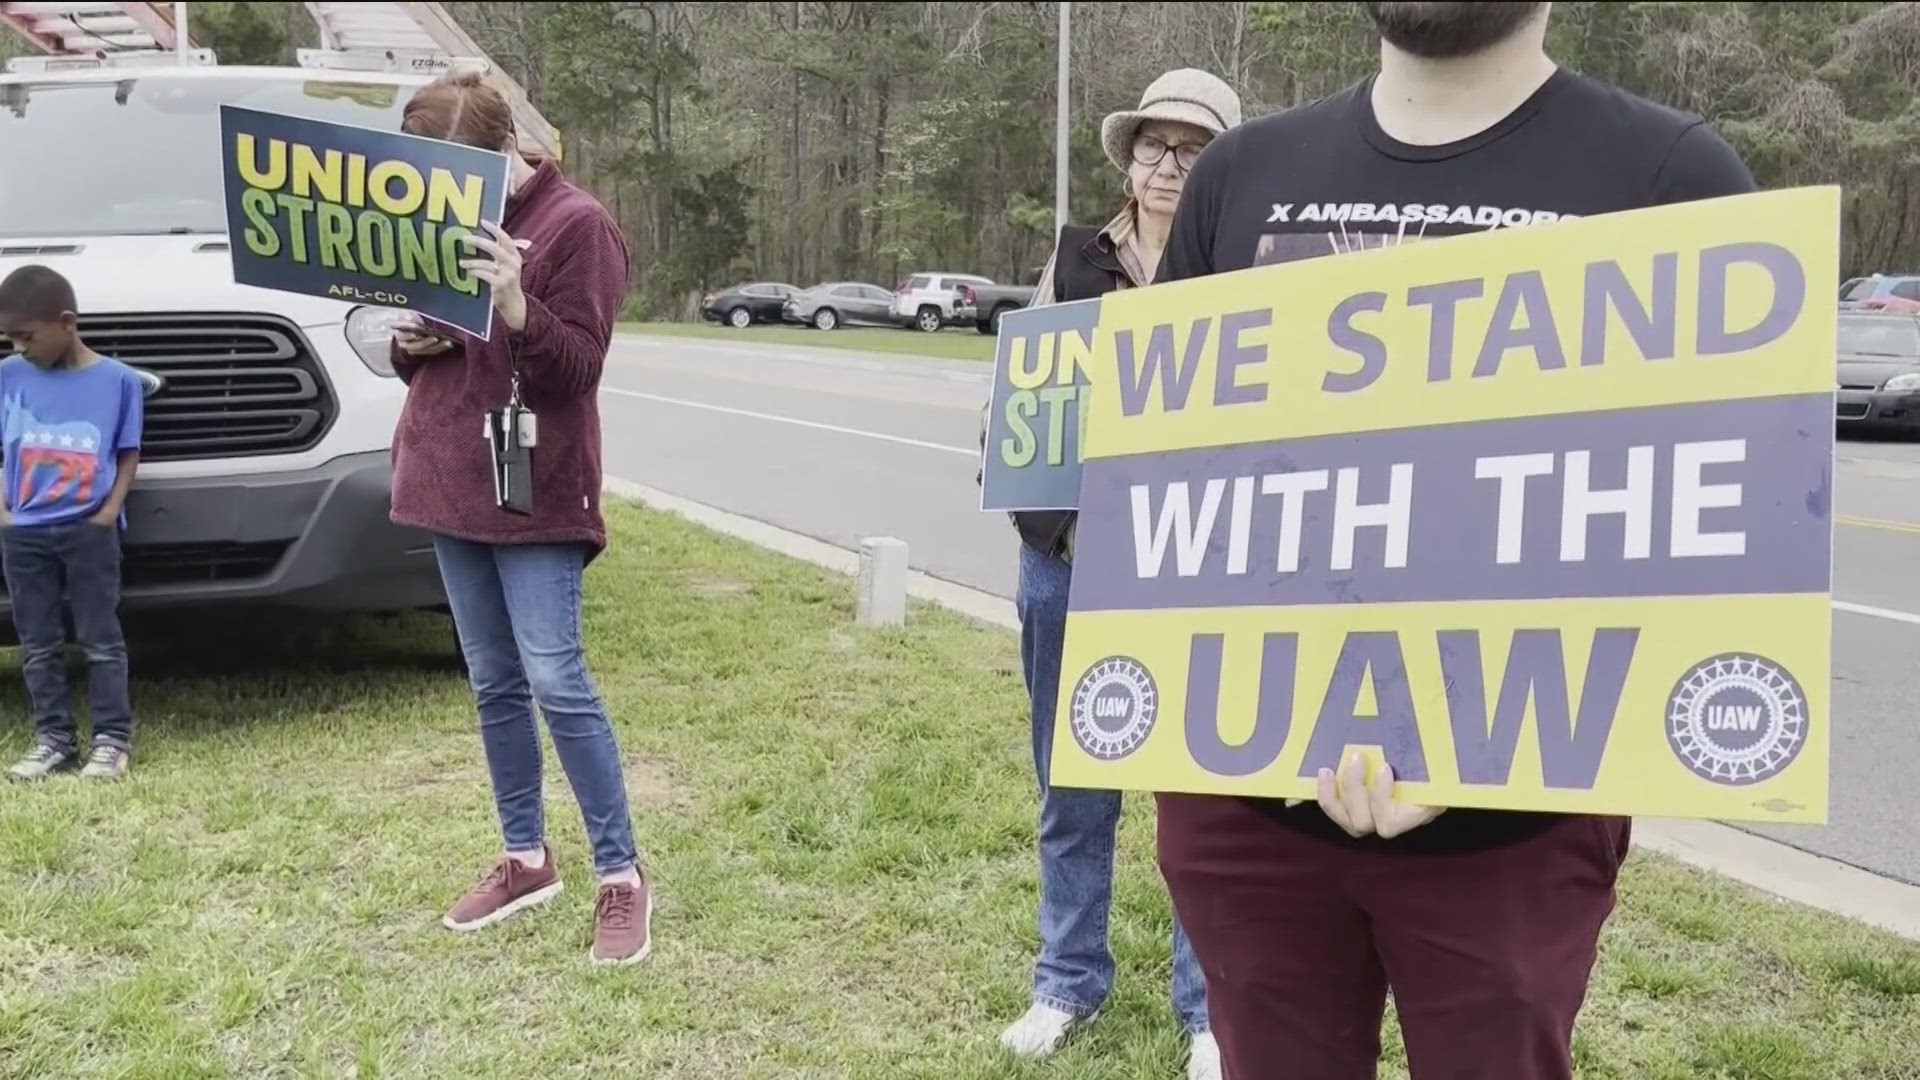 Many Georgia workers were among those celebrating in Chattanooga last weekend when a Volkswagen auto assembly plant voted to unionize.